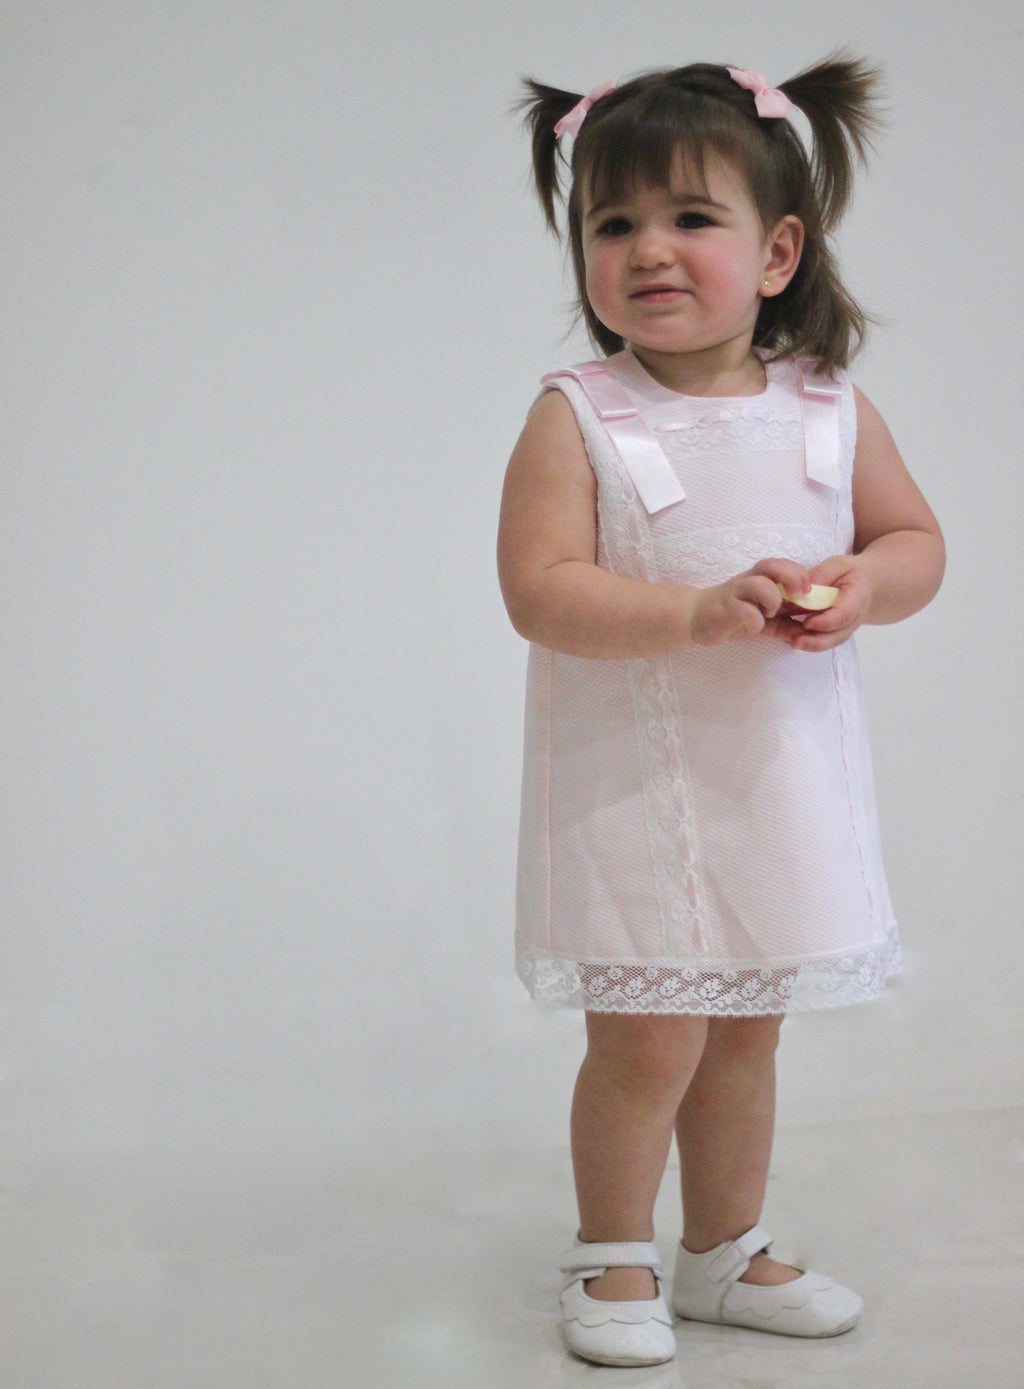 A-line Pique dress with lace and shoulder bows